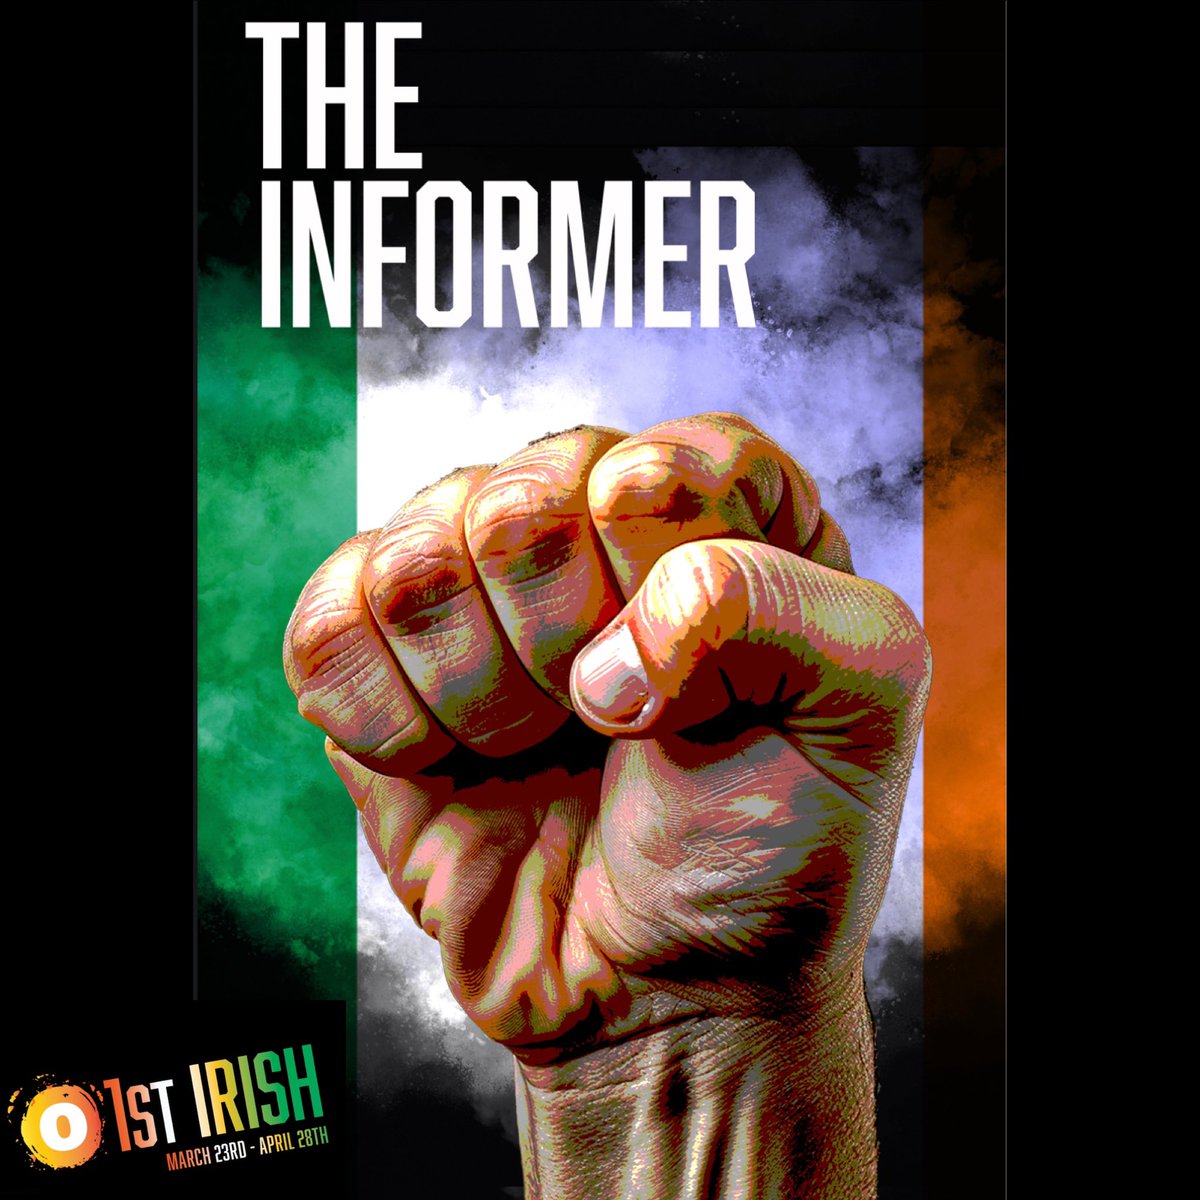 The Informer @origintheatre #1stIrish 2024 ALERT 1st Irish 2024 launches this Saturday with a reading of Larry Kirwan’s The Informer, directed by Bobby Moresco, at the American Irish Historical Society on 5th Ave. March 23rd 🎟️ origintheatre.org